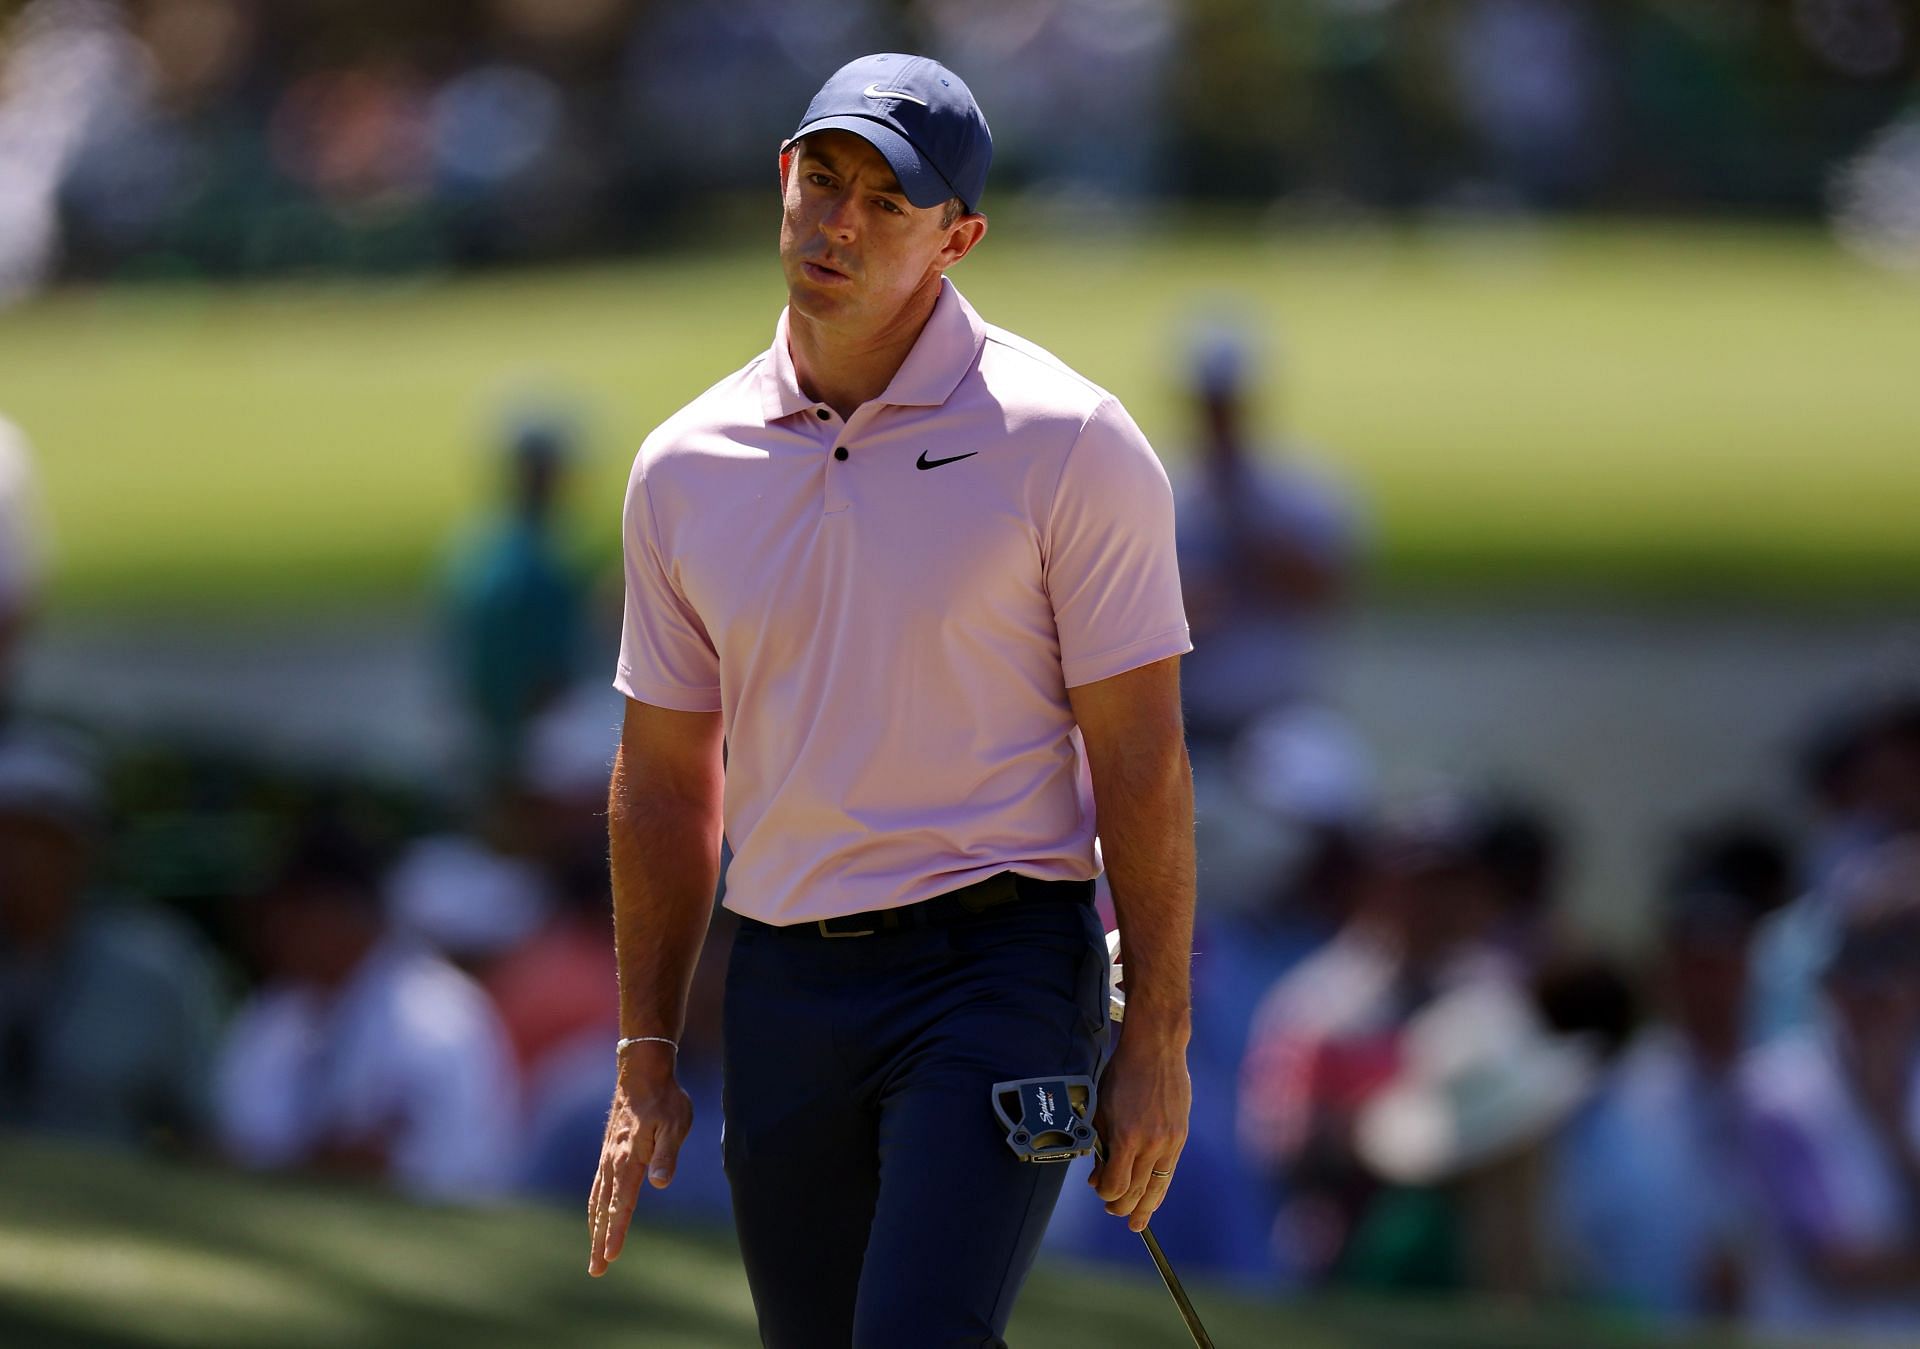 Rory McIlroy came up short at Augusta National